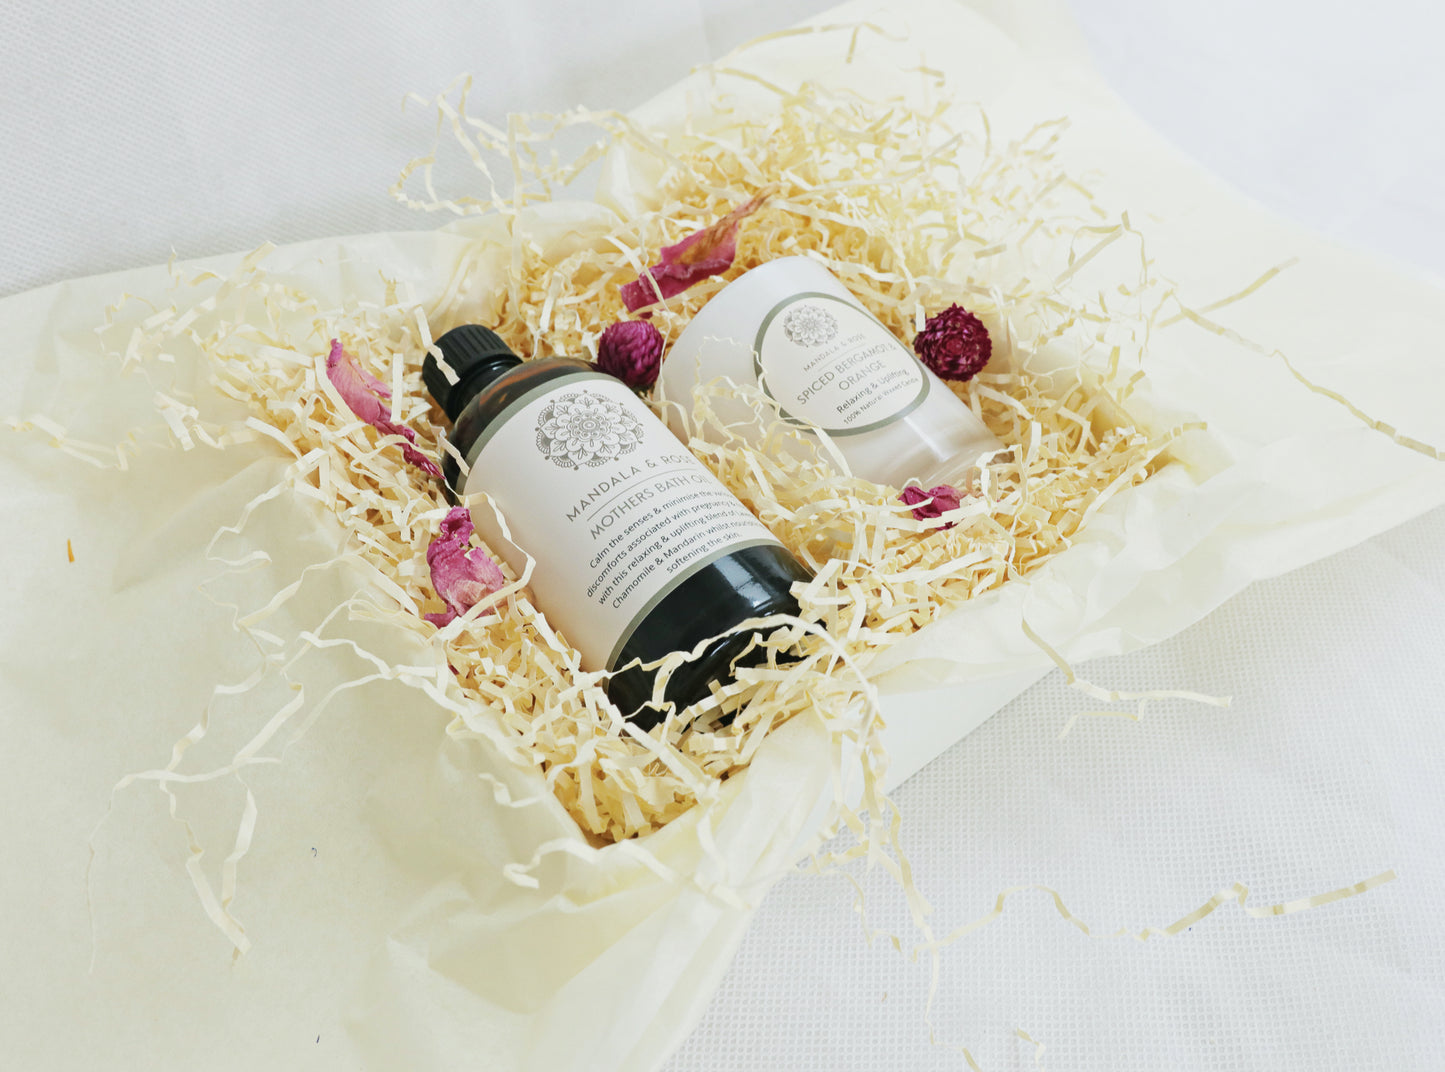 Mothers Relax & Unwind Gift Set